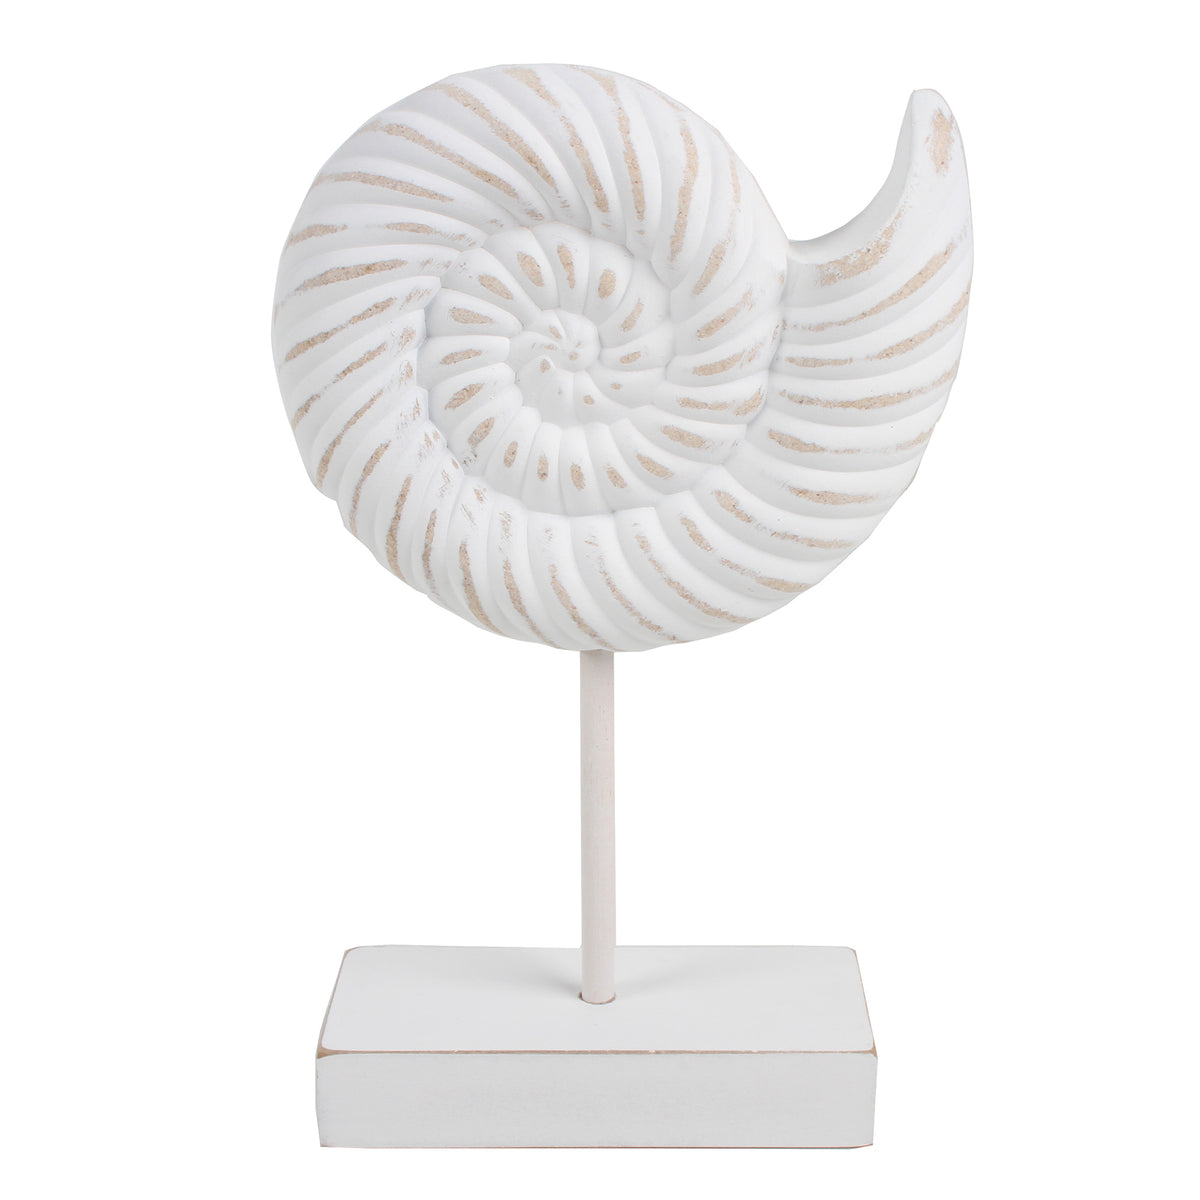 7 Seas Conch Wood Shell On Stand 25 x 14 x 6cm